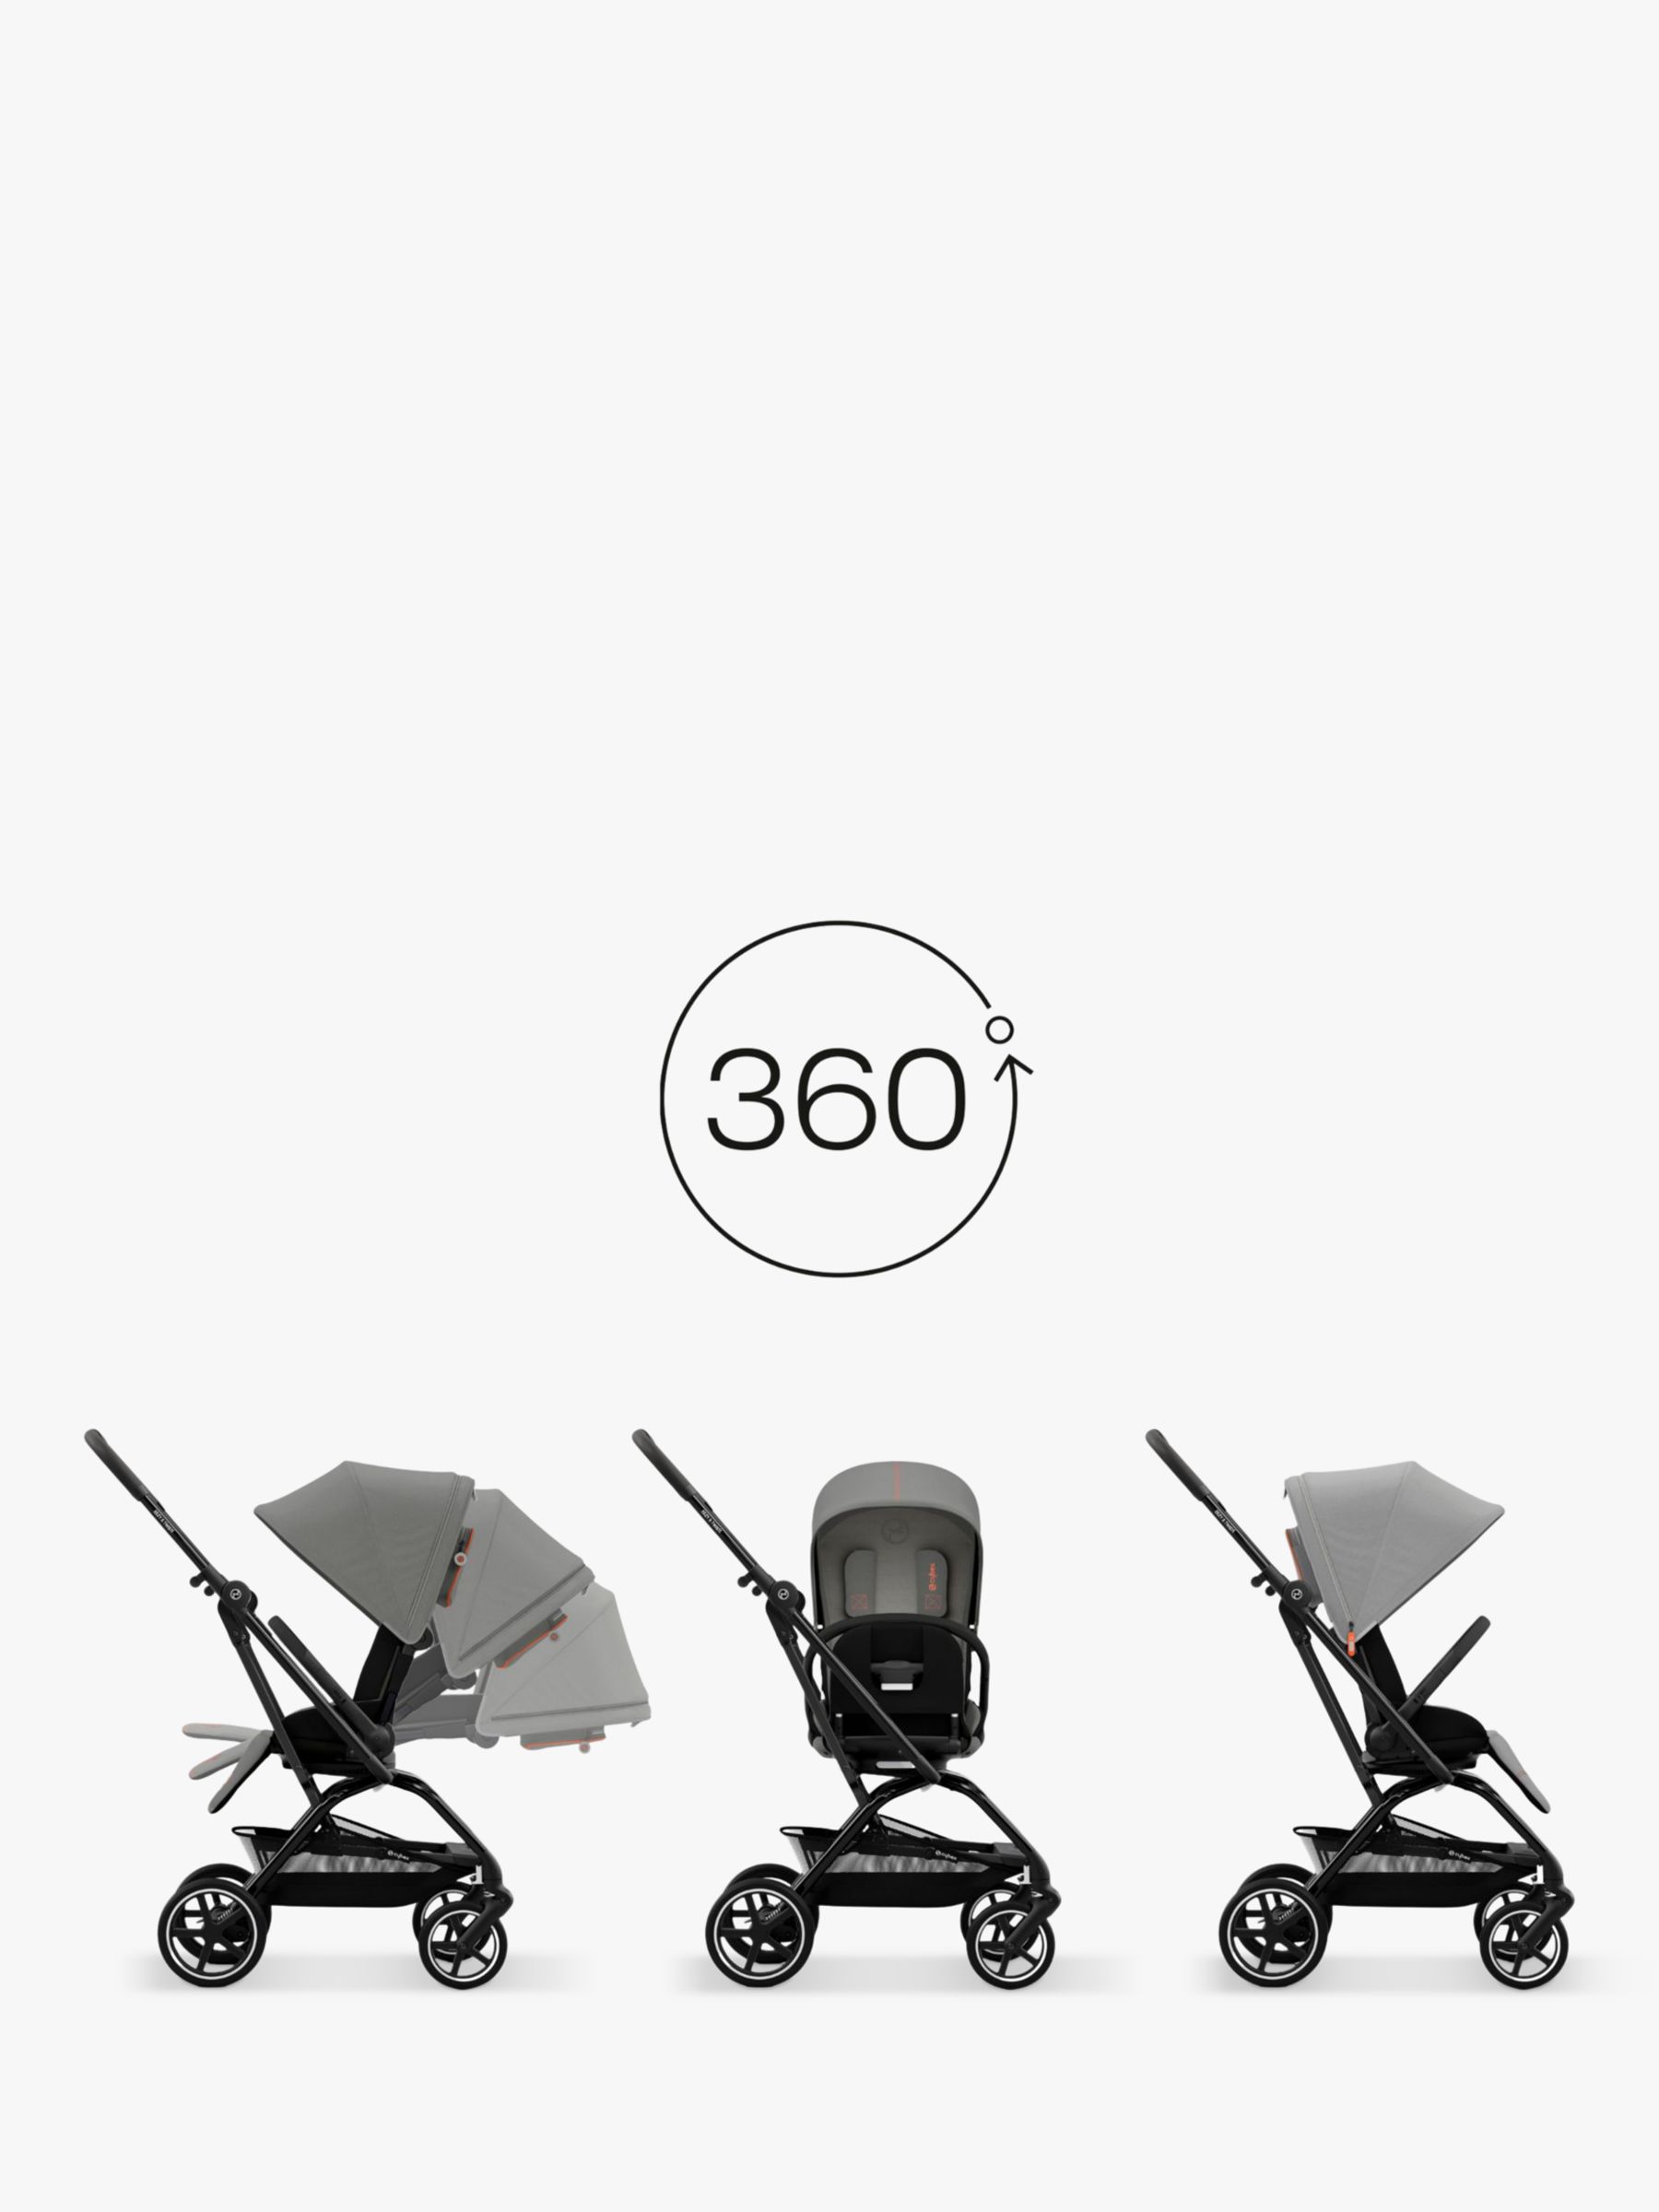  CYBEX Eezy S Twist +2 V2 Baby Stroller with 360° Rotating Seat  for Infants 6 Months and Up - Compatible with CYBEX Car Seats : Baby